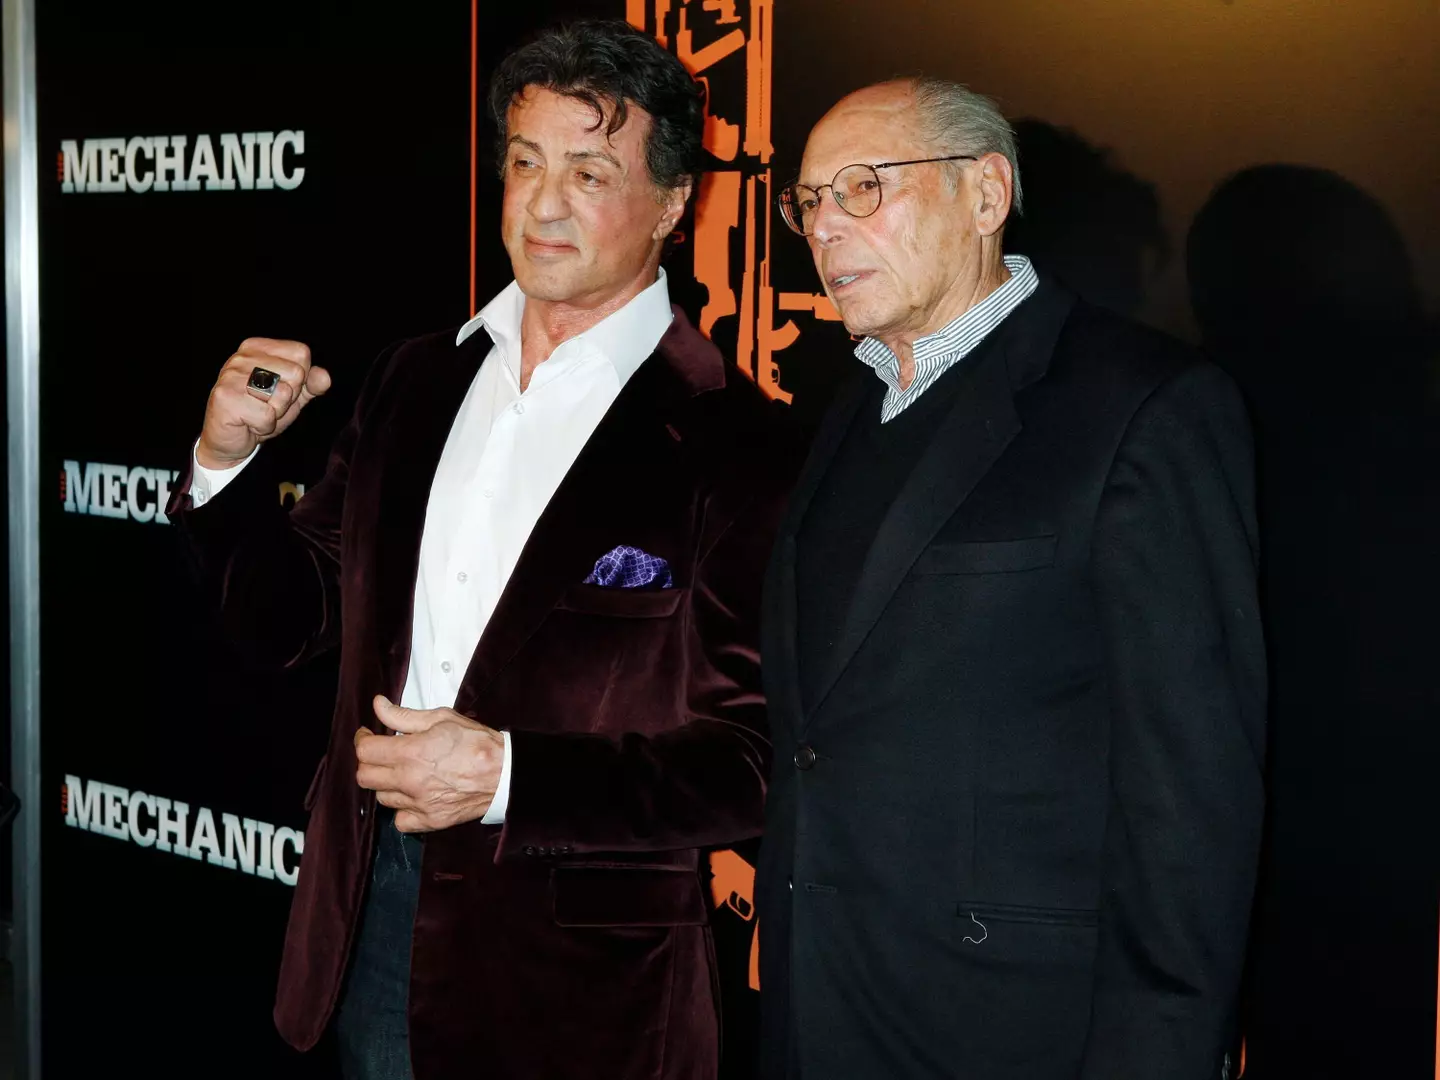 Stallone has hit out out Rocky producer Irwin Winkler over the planned Ivan Drago spin-off film (Image: Alamy)